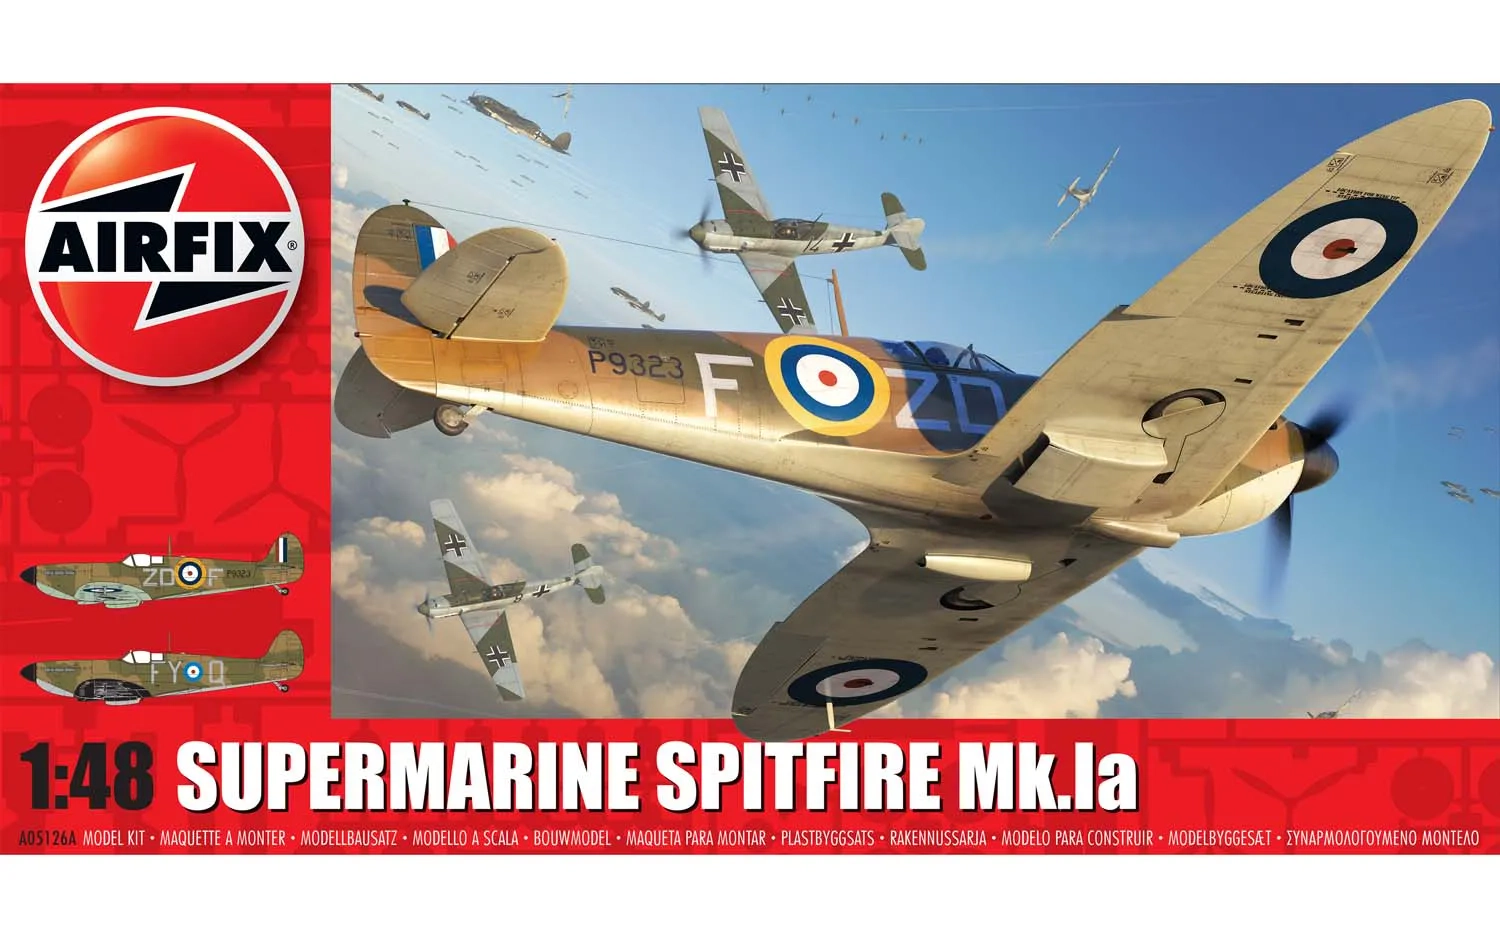 The 1:48 Spitfire Collection